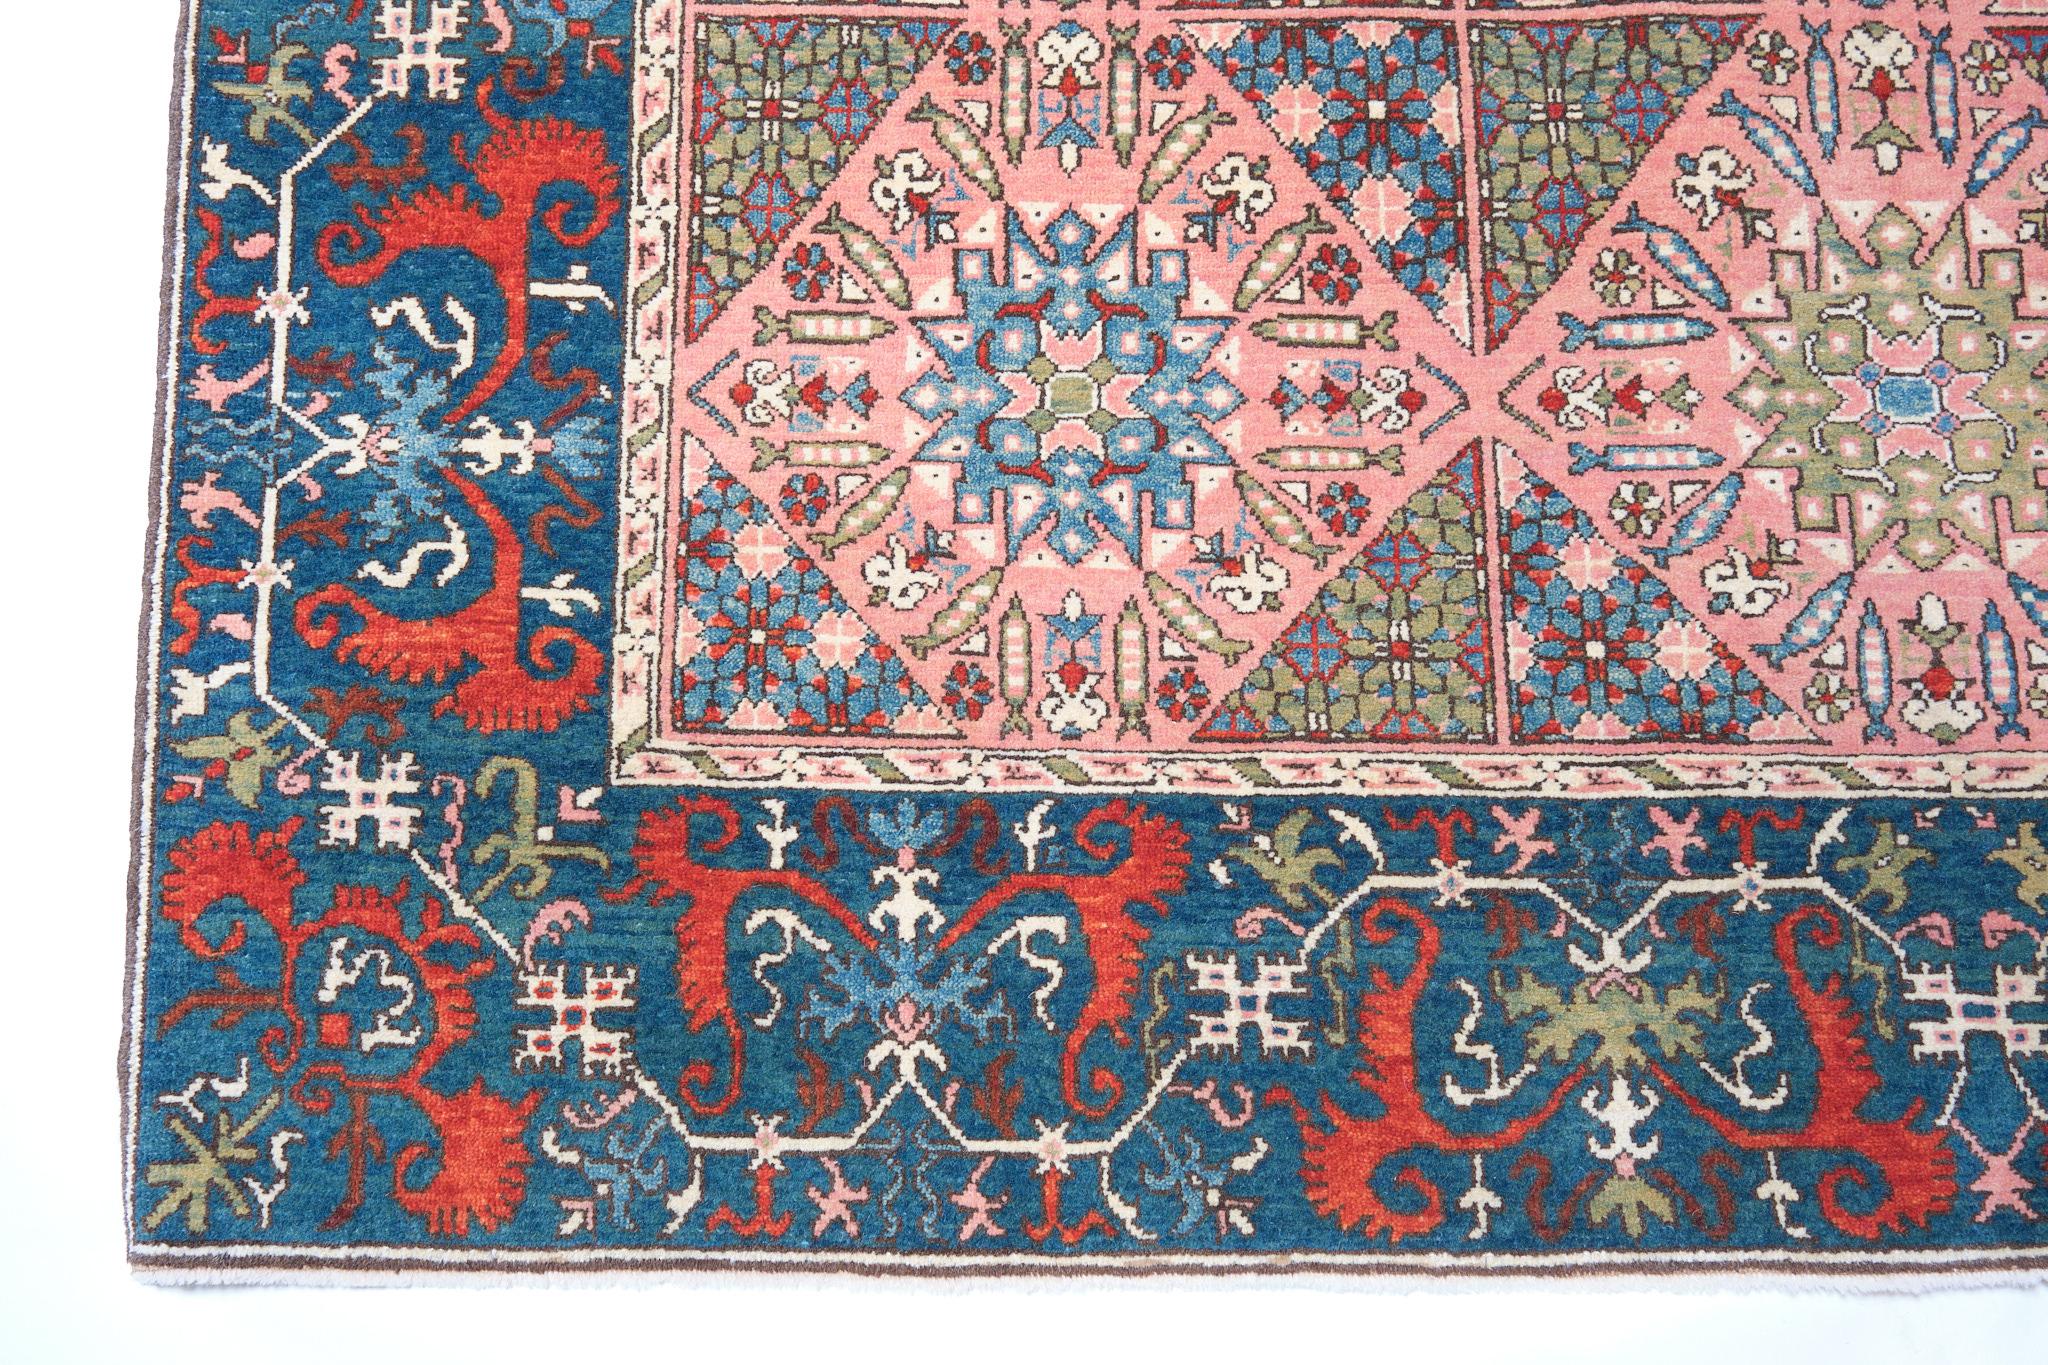 The source of carpet comes from the book Islamic Carpets, Joseph V. McMullan, Near Eastern Art Research Center Inc., New York 1965 nr.28. The field of the so-called “Chessboard” Carpet ( so-called Checkerboard Rug ) is usually applied on a